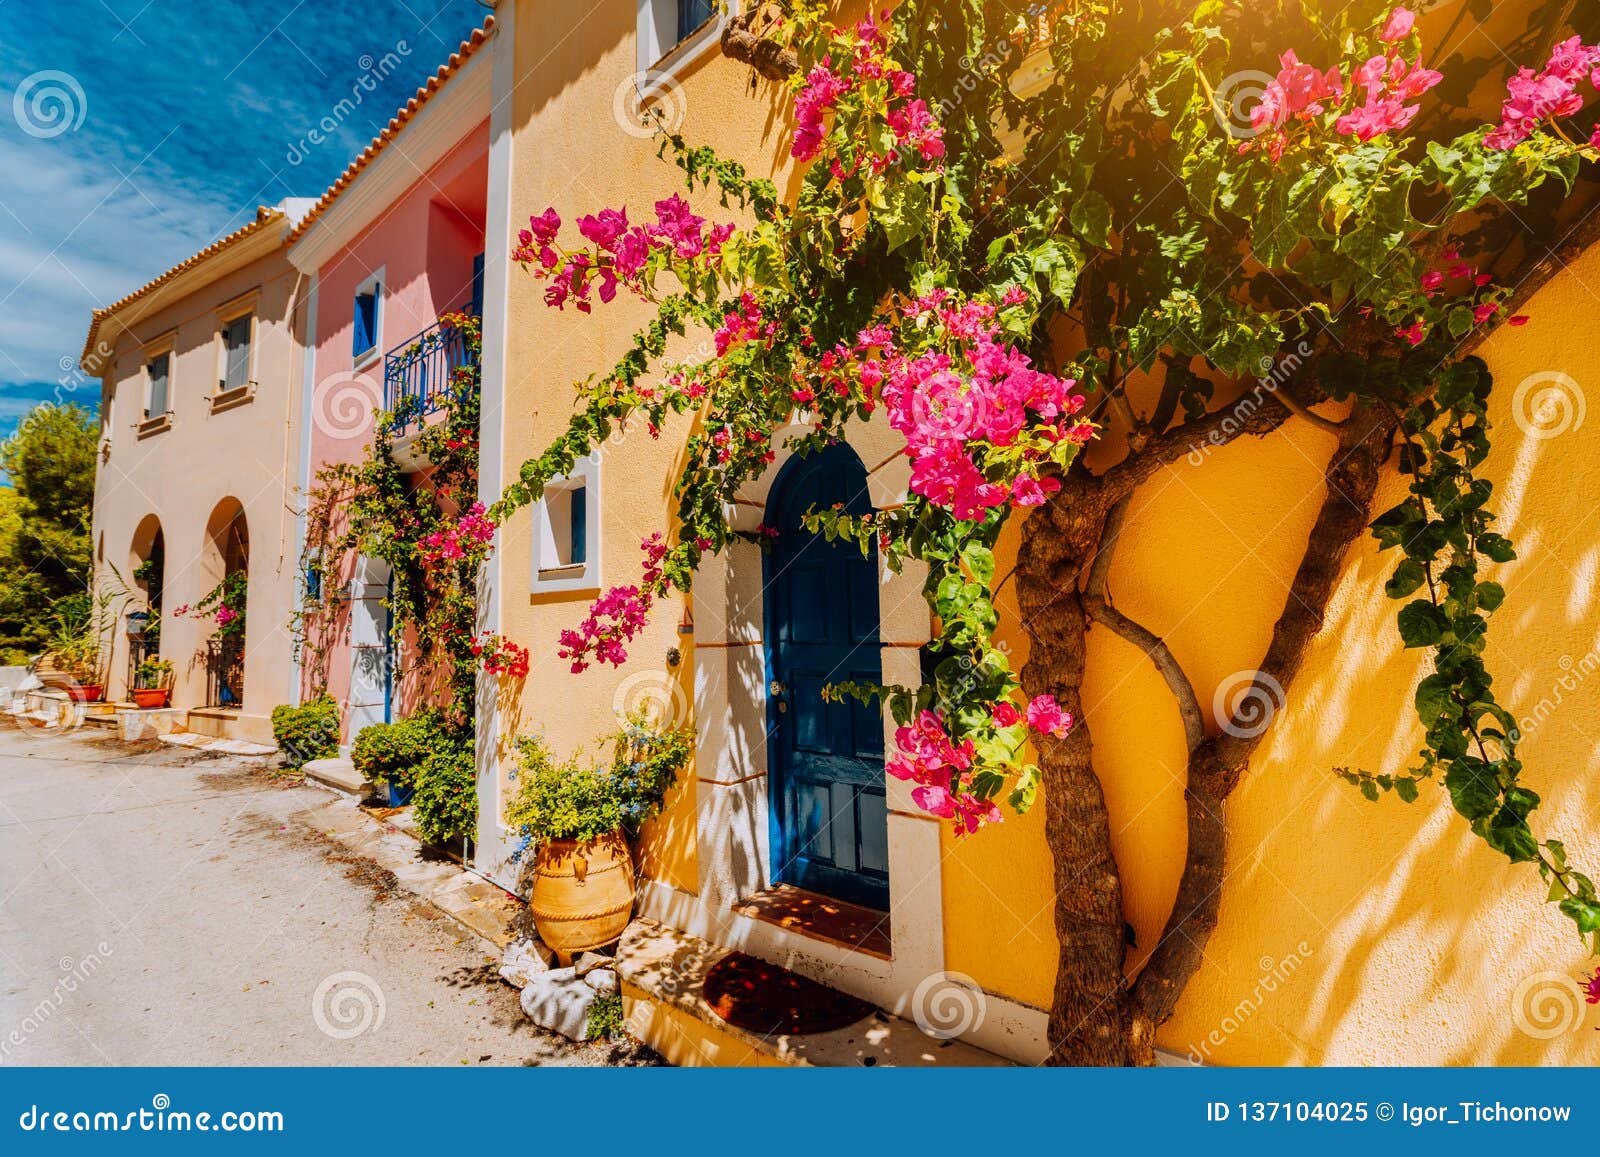 traditional colorful greek houses in assos village. blooming fuchsia plant flowers growing around door. warm sunlight. kefalonia